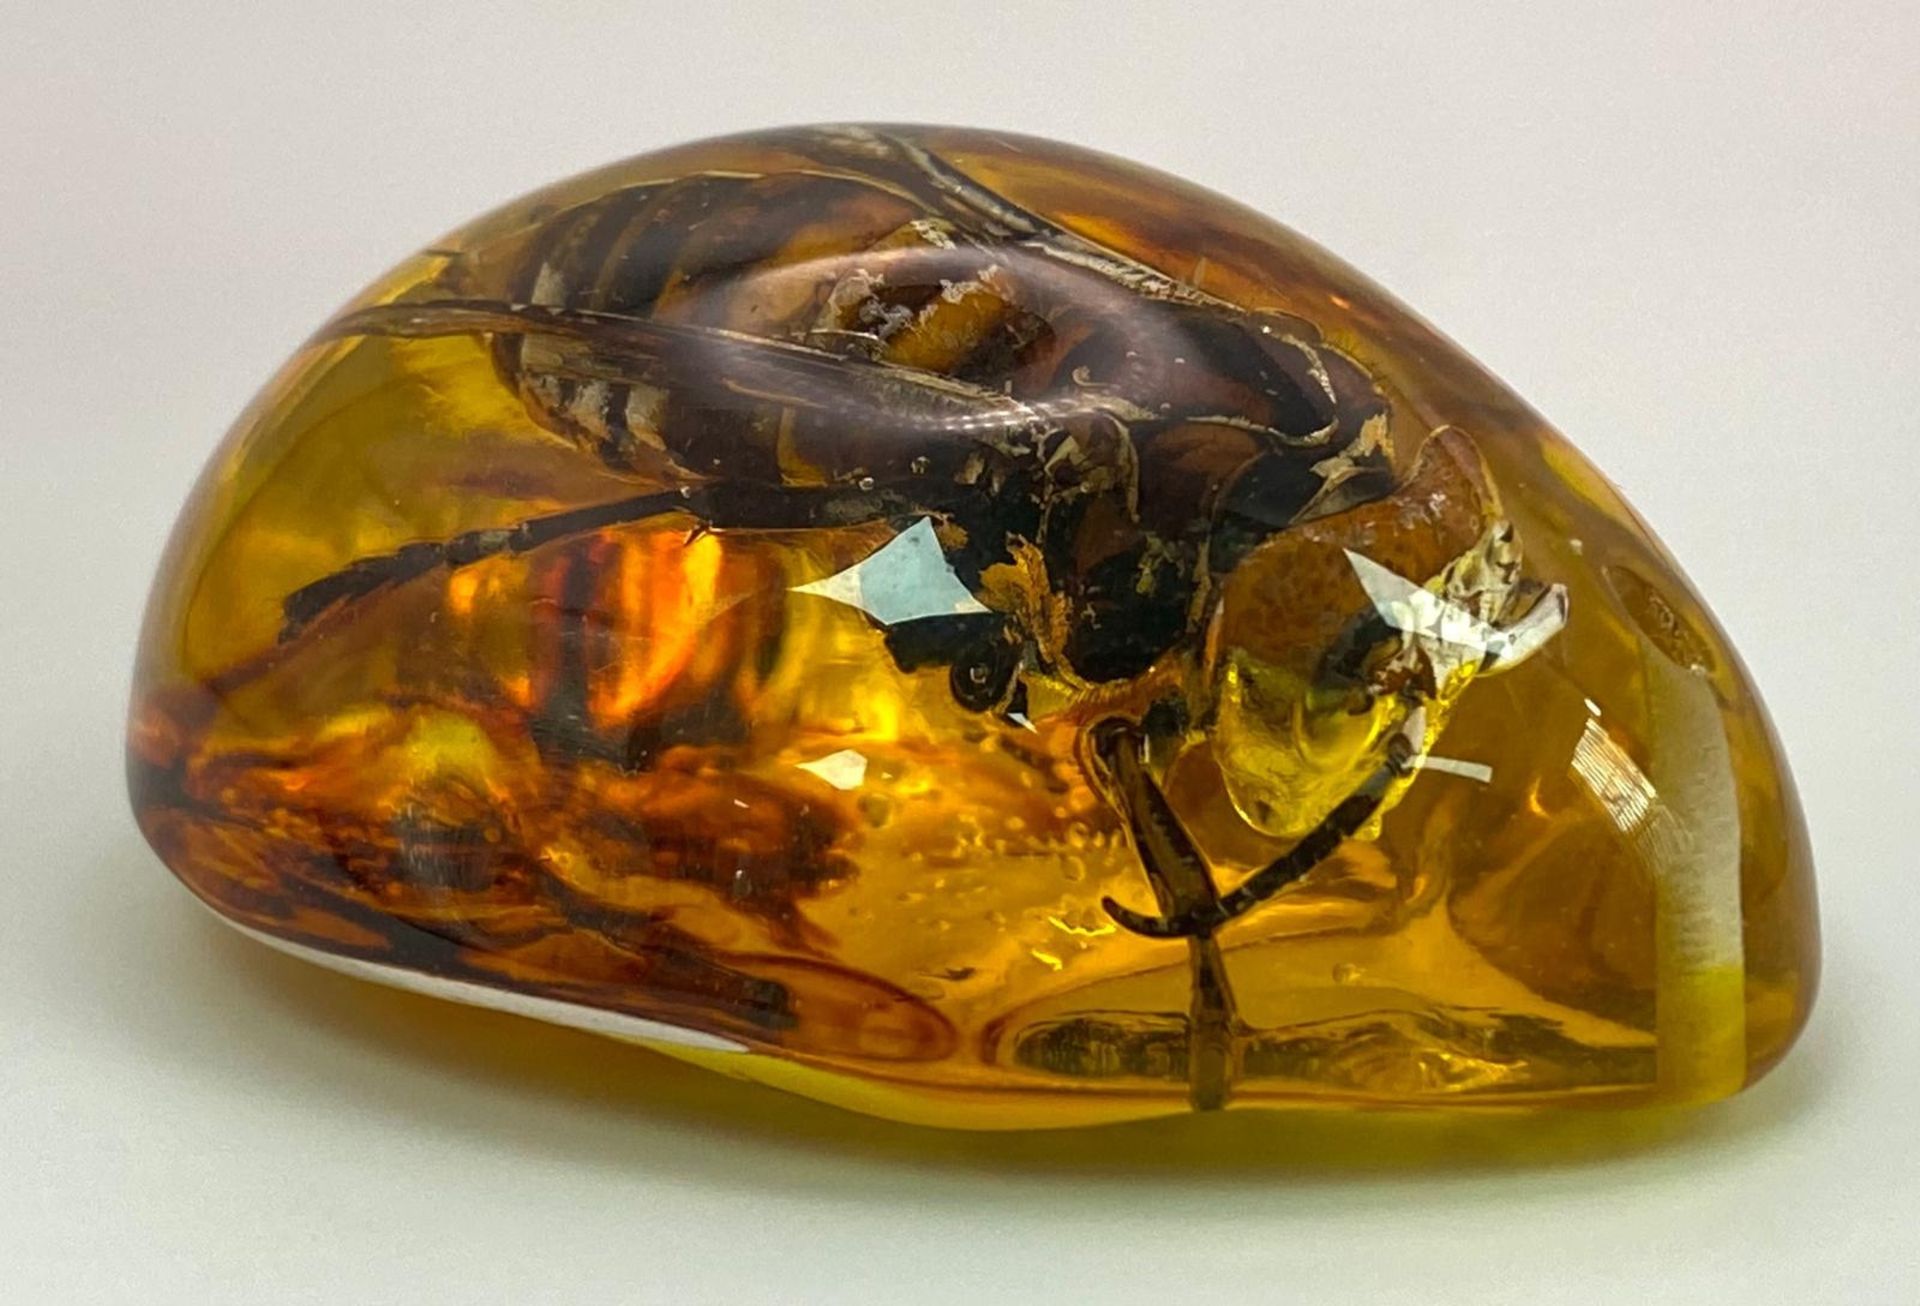 A Monstrous Asian Hornet - The Stuff of Nightmares! Now yours in an amber resin pendant or